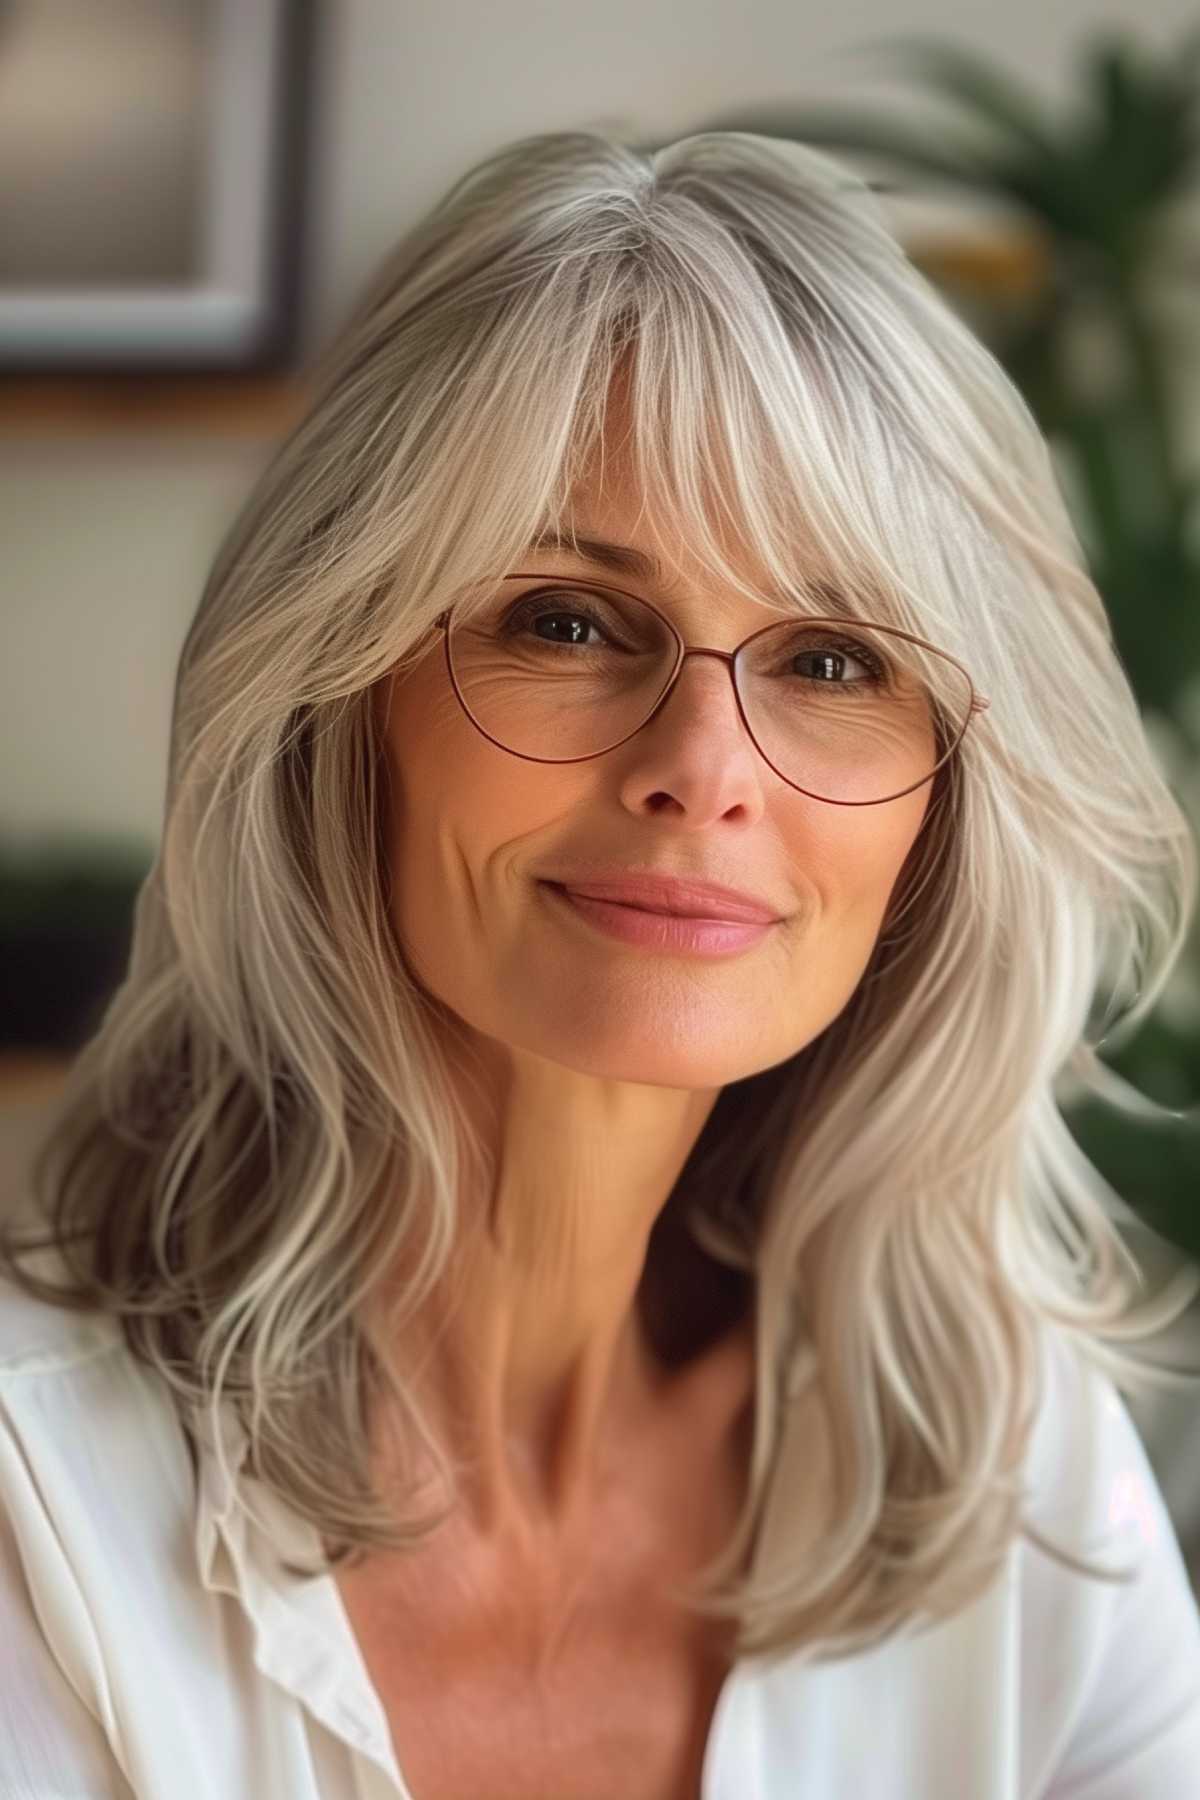 Smiling mature woman with medium-length hair and light, wispy bangs, wearing glasses and a white blouse.